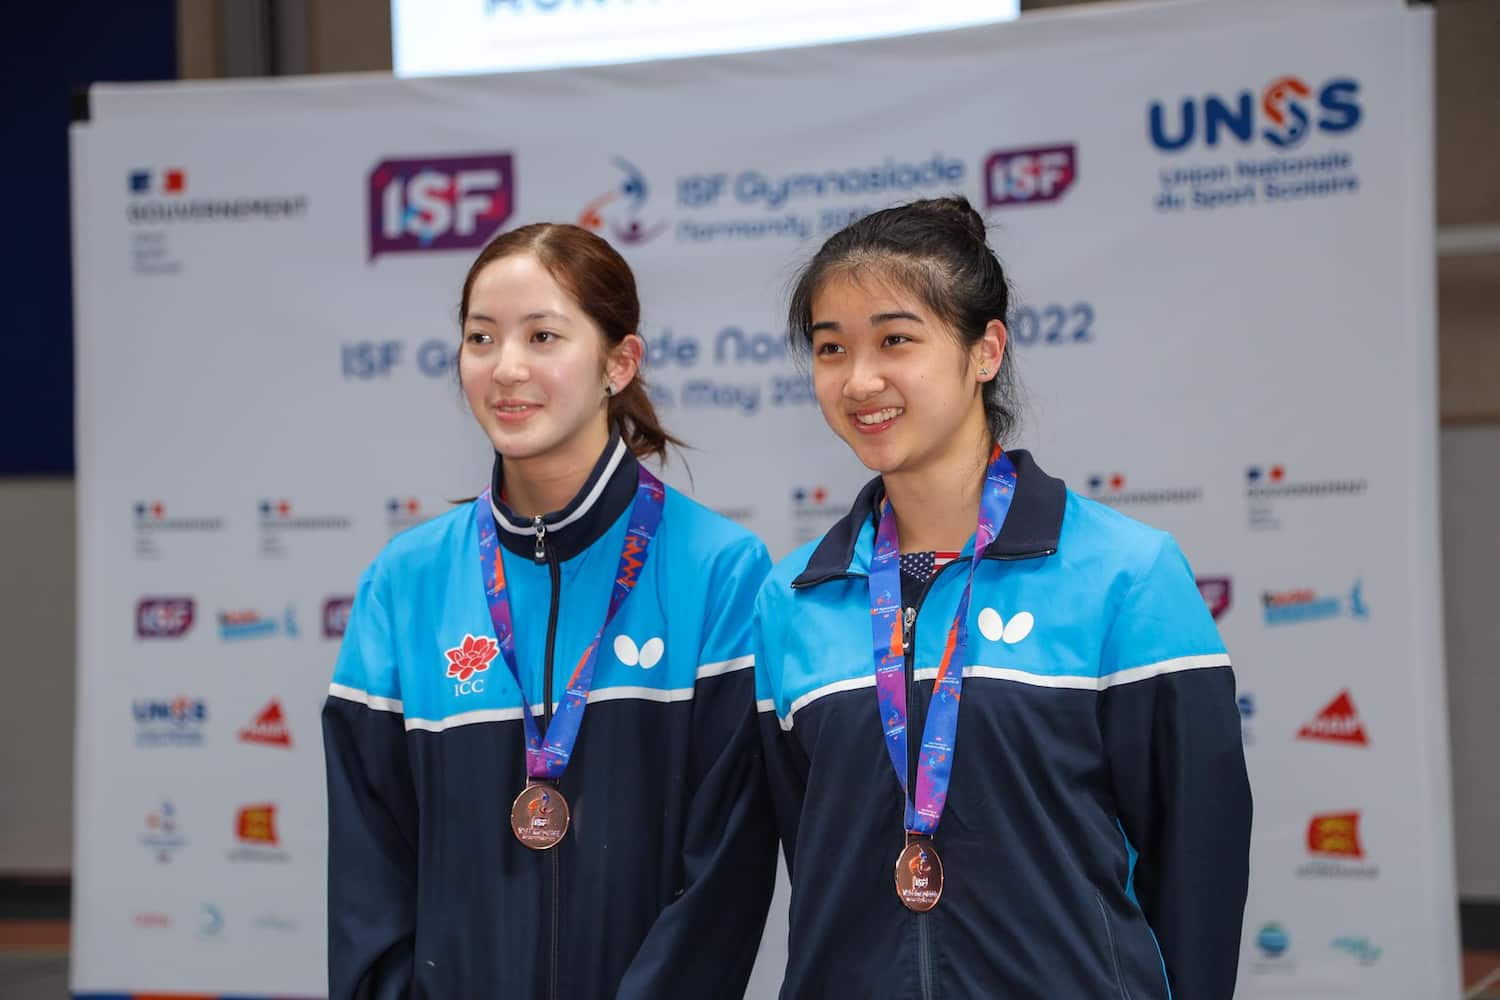 Rachel Sung and Angie Tan earn bronze medals at the ISF Gymnasiade Normandy 2022 in France.